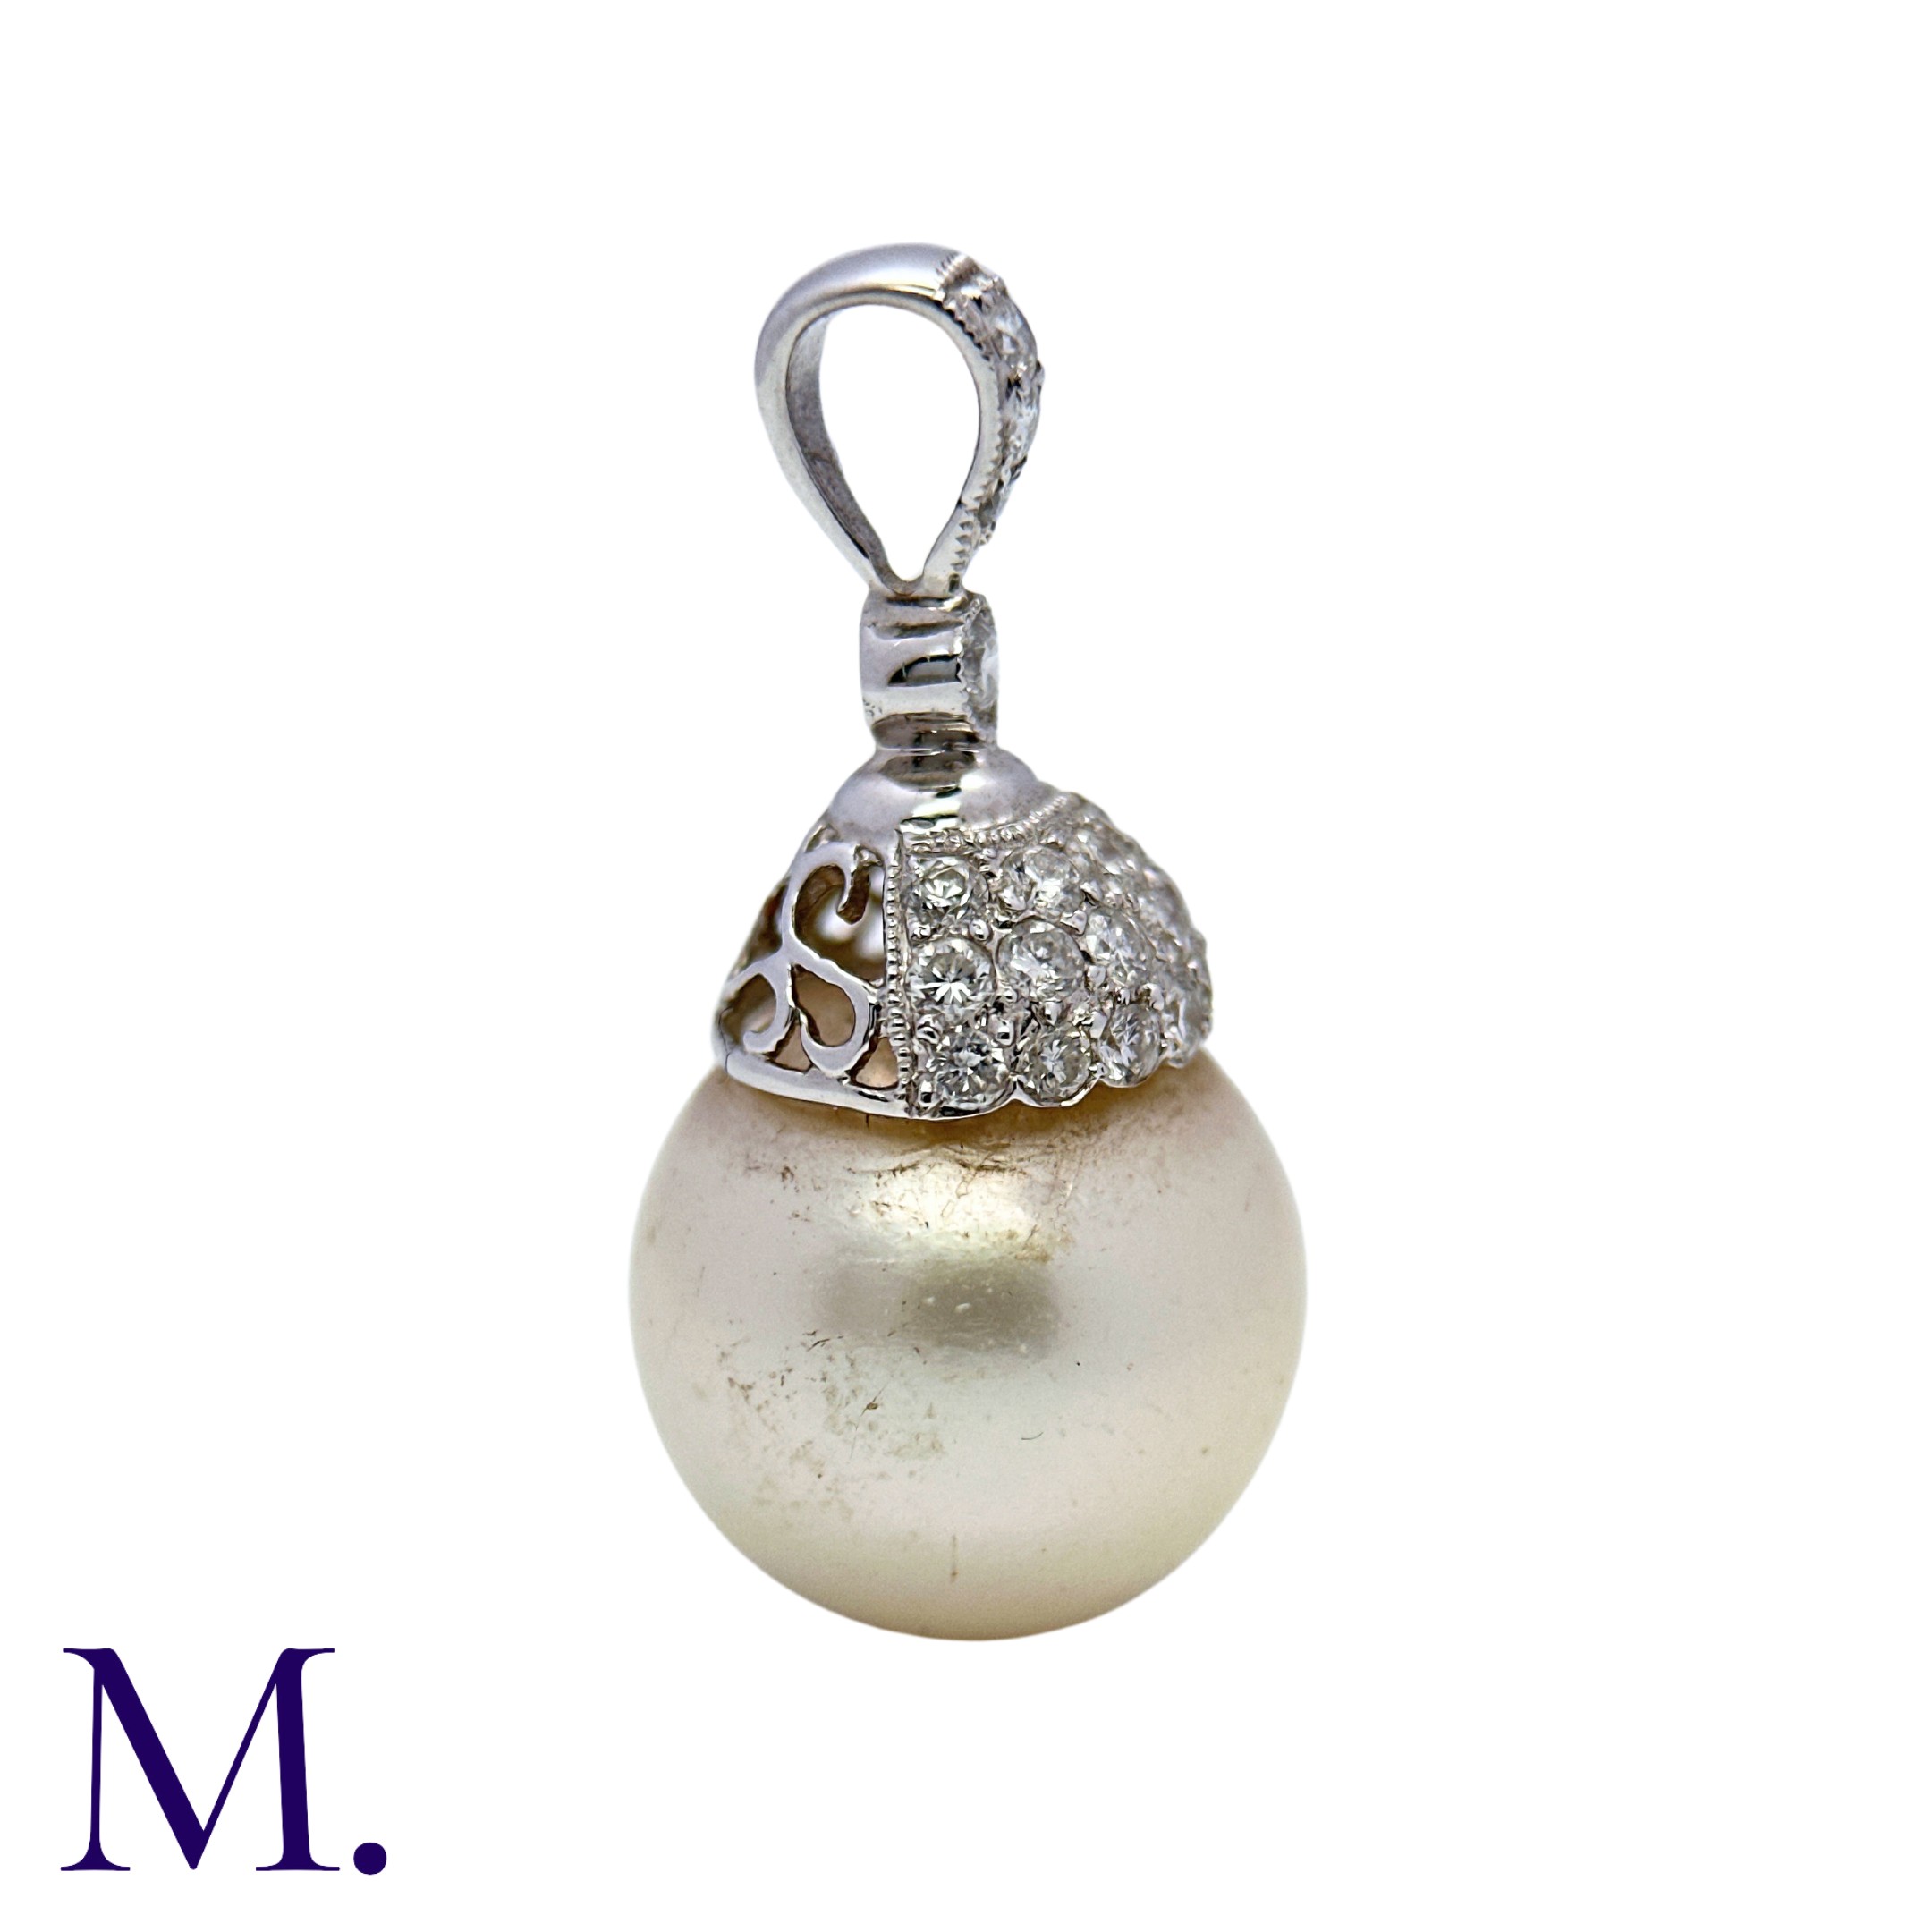 A Diamond and Pearl Drop Pendant in 18K white gold, set with a round cream pearl of approximately